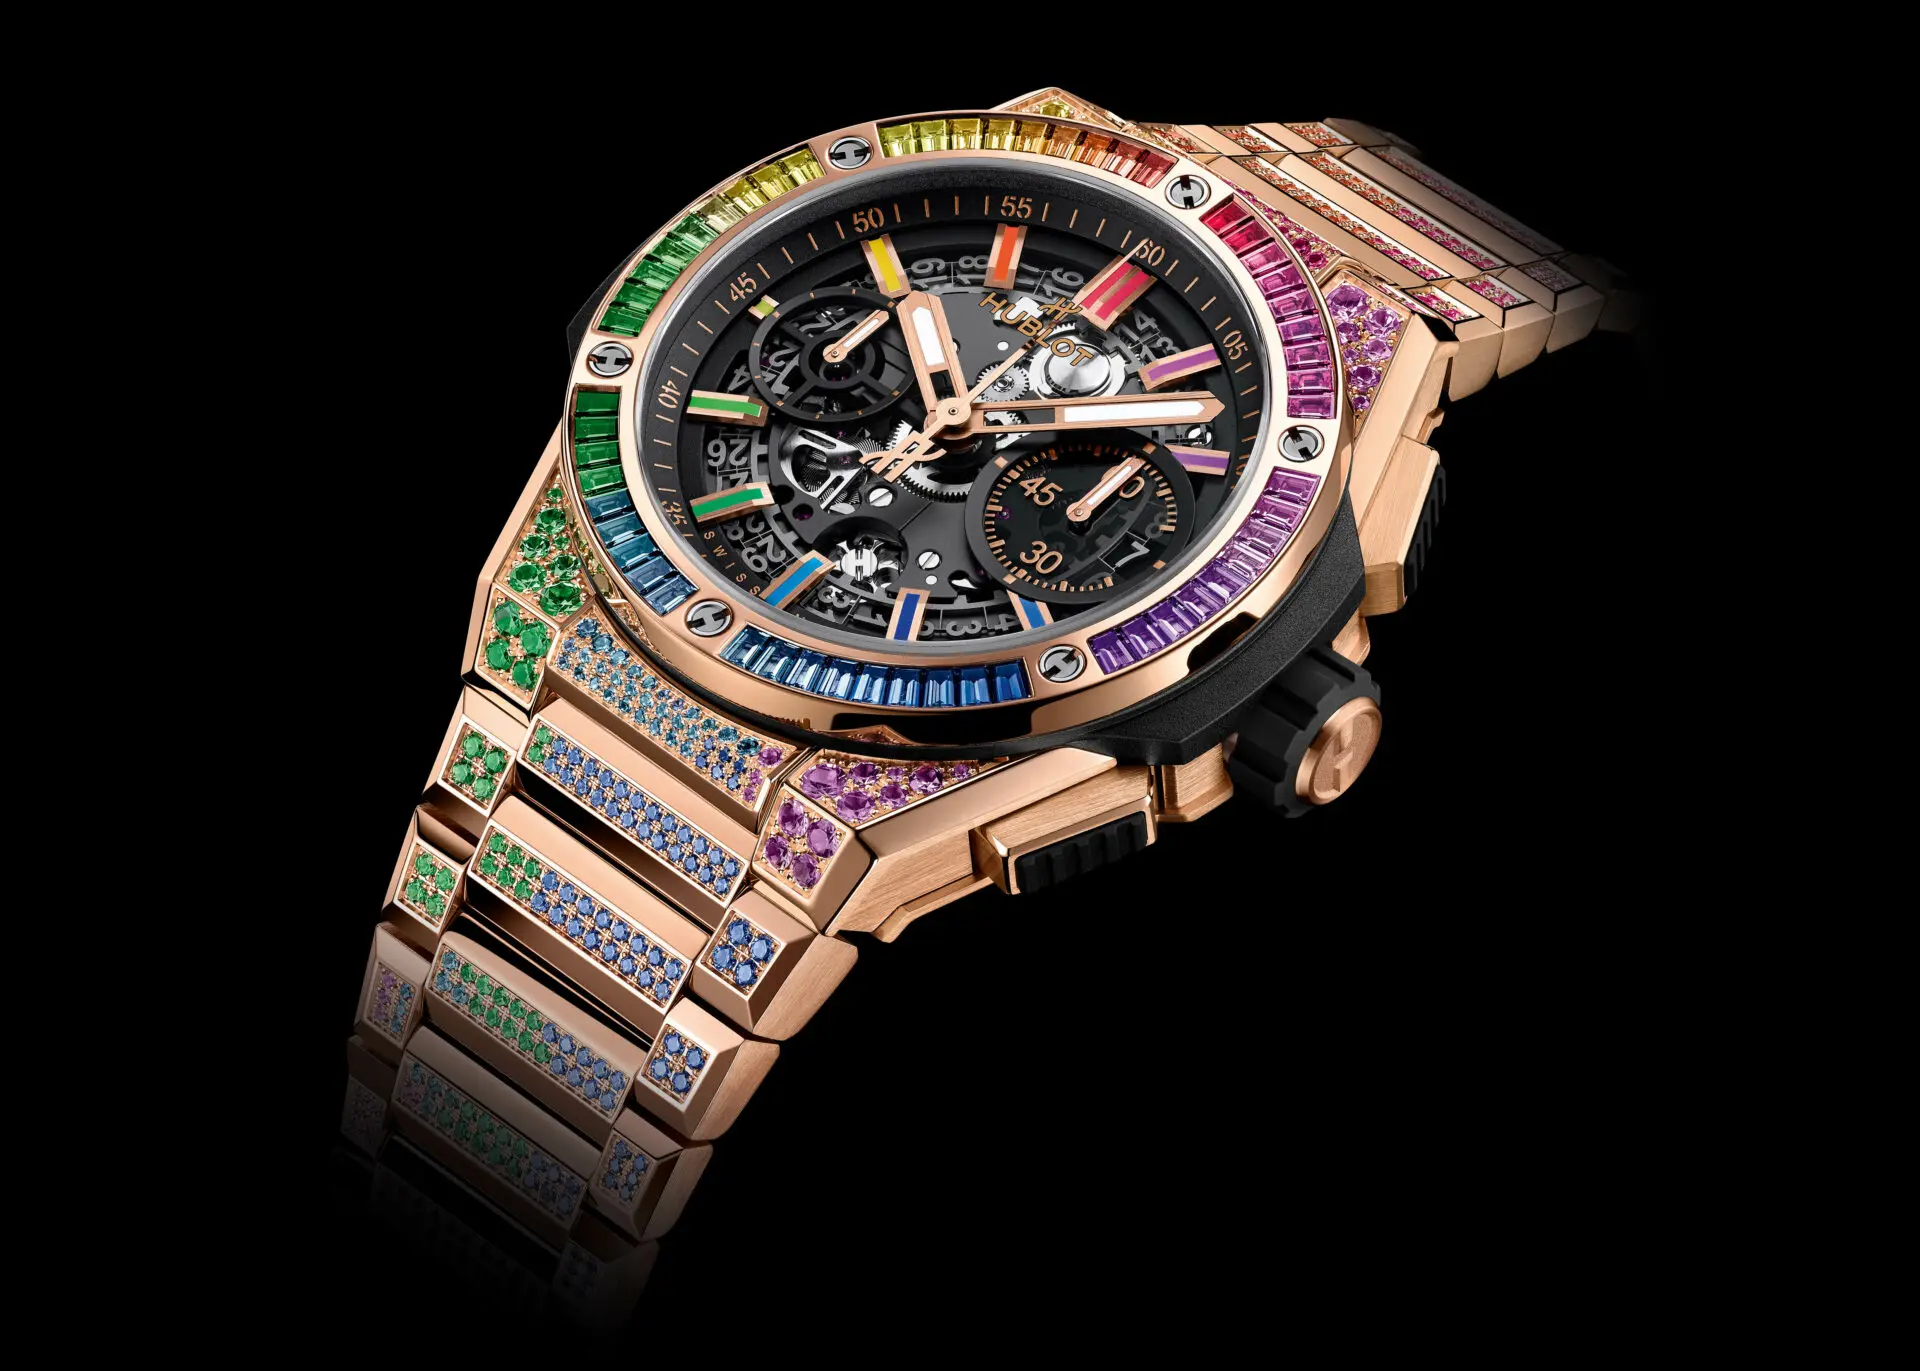 6 must-have timepieces from LVMH Watch Week 2023: from the Bulgari Serpenti  Seduttori and Tag Heuer Monza, to the Hublot Big Bang Integrated King Gold  Rainbow and Zenith Defy Skyline Skeleton